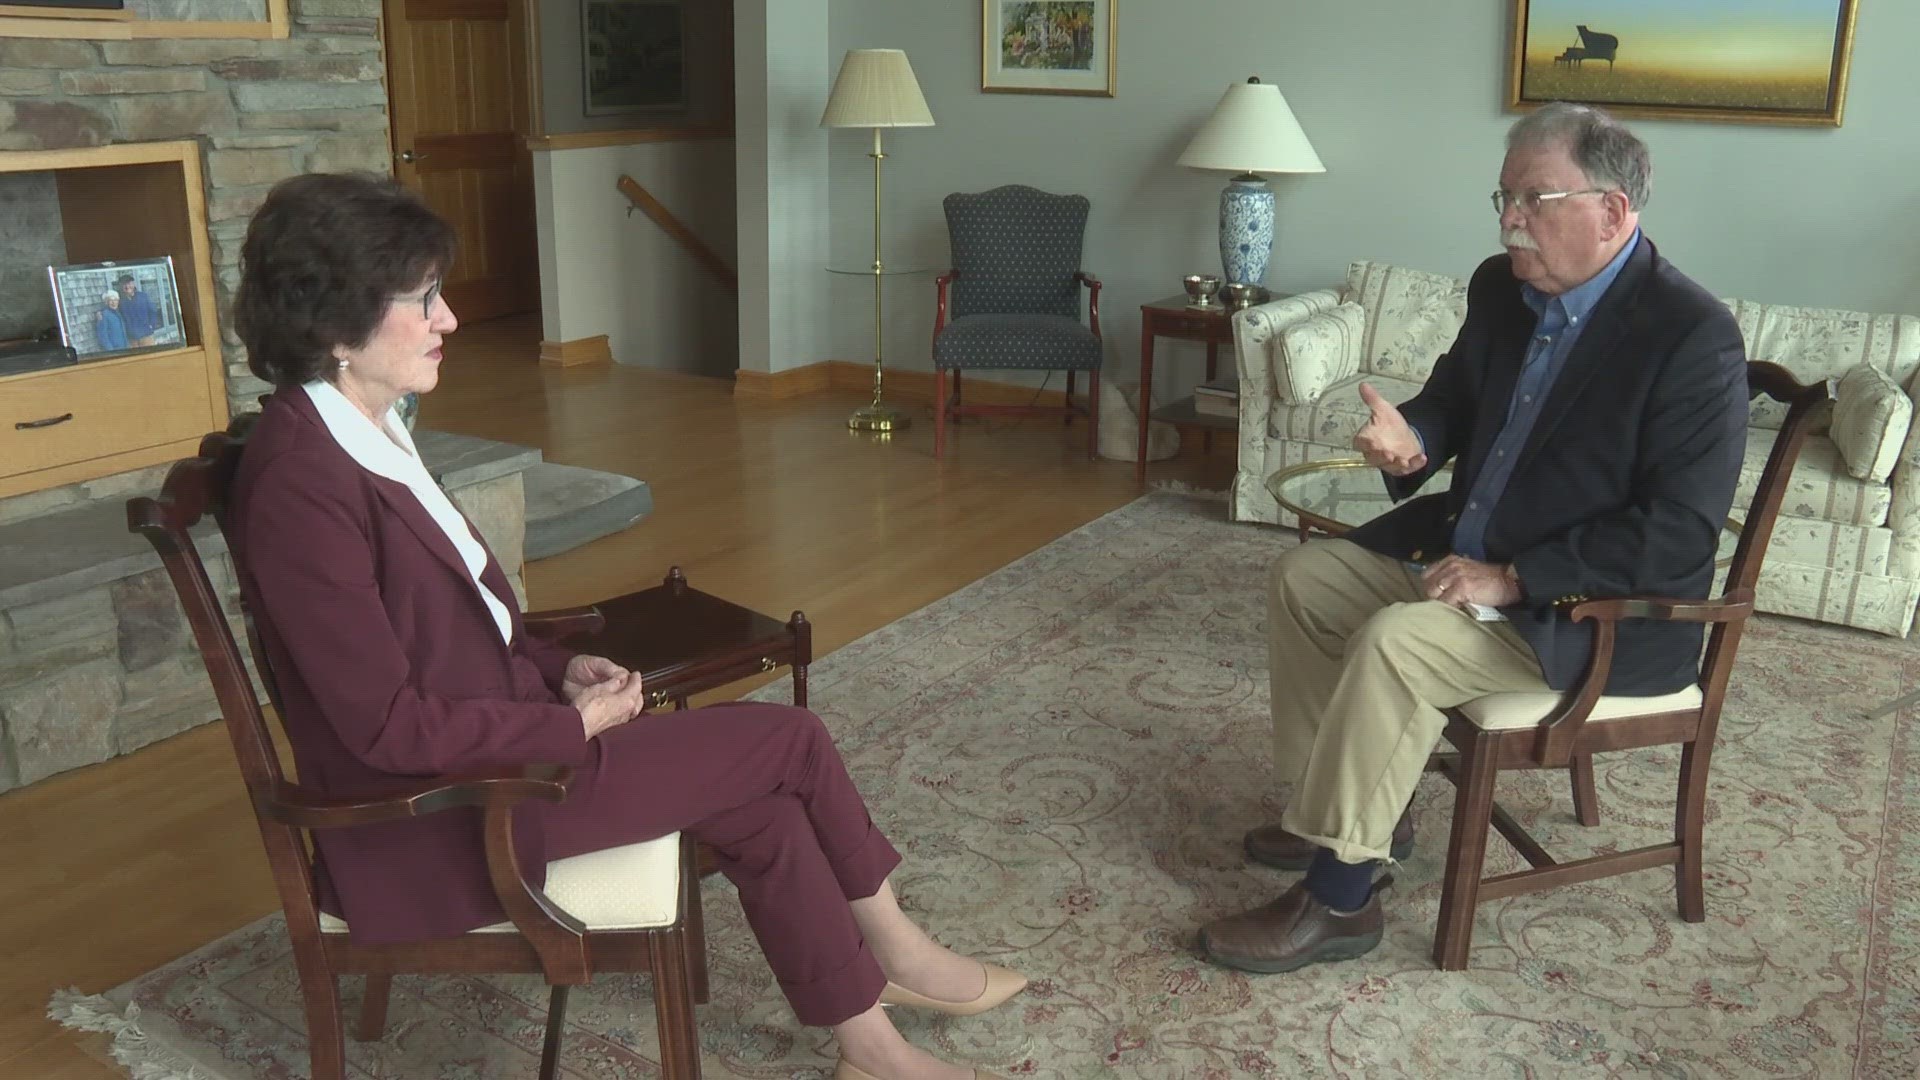 Sen. Collins sat down with 207's Don Carrigan to discuss her work in Congress.